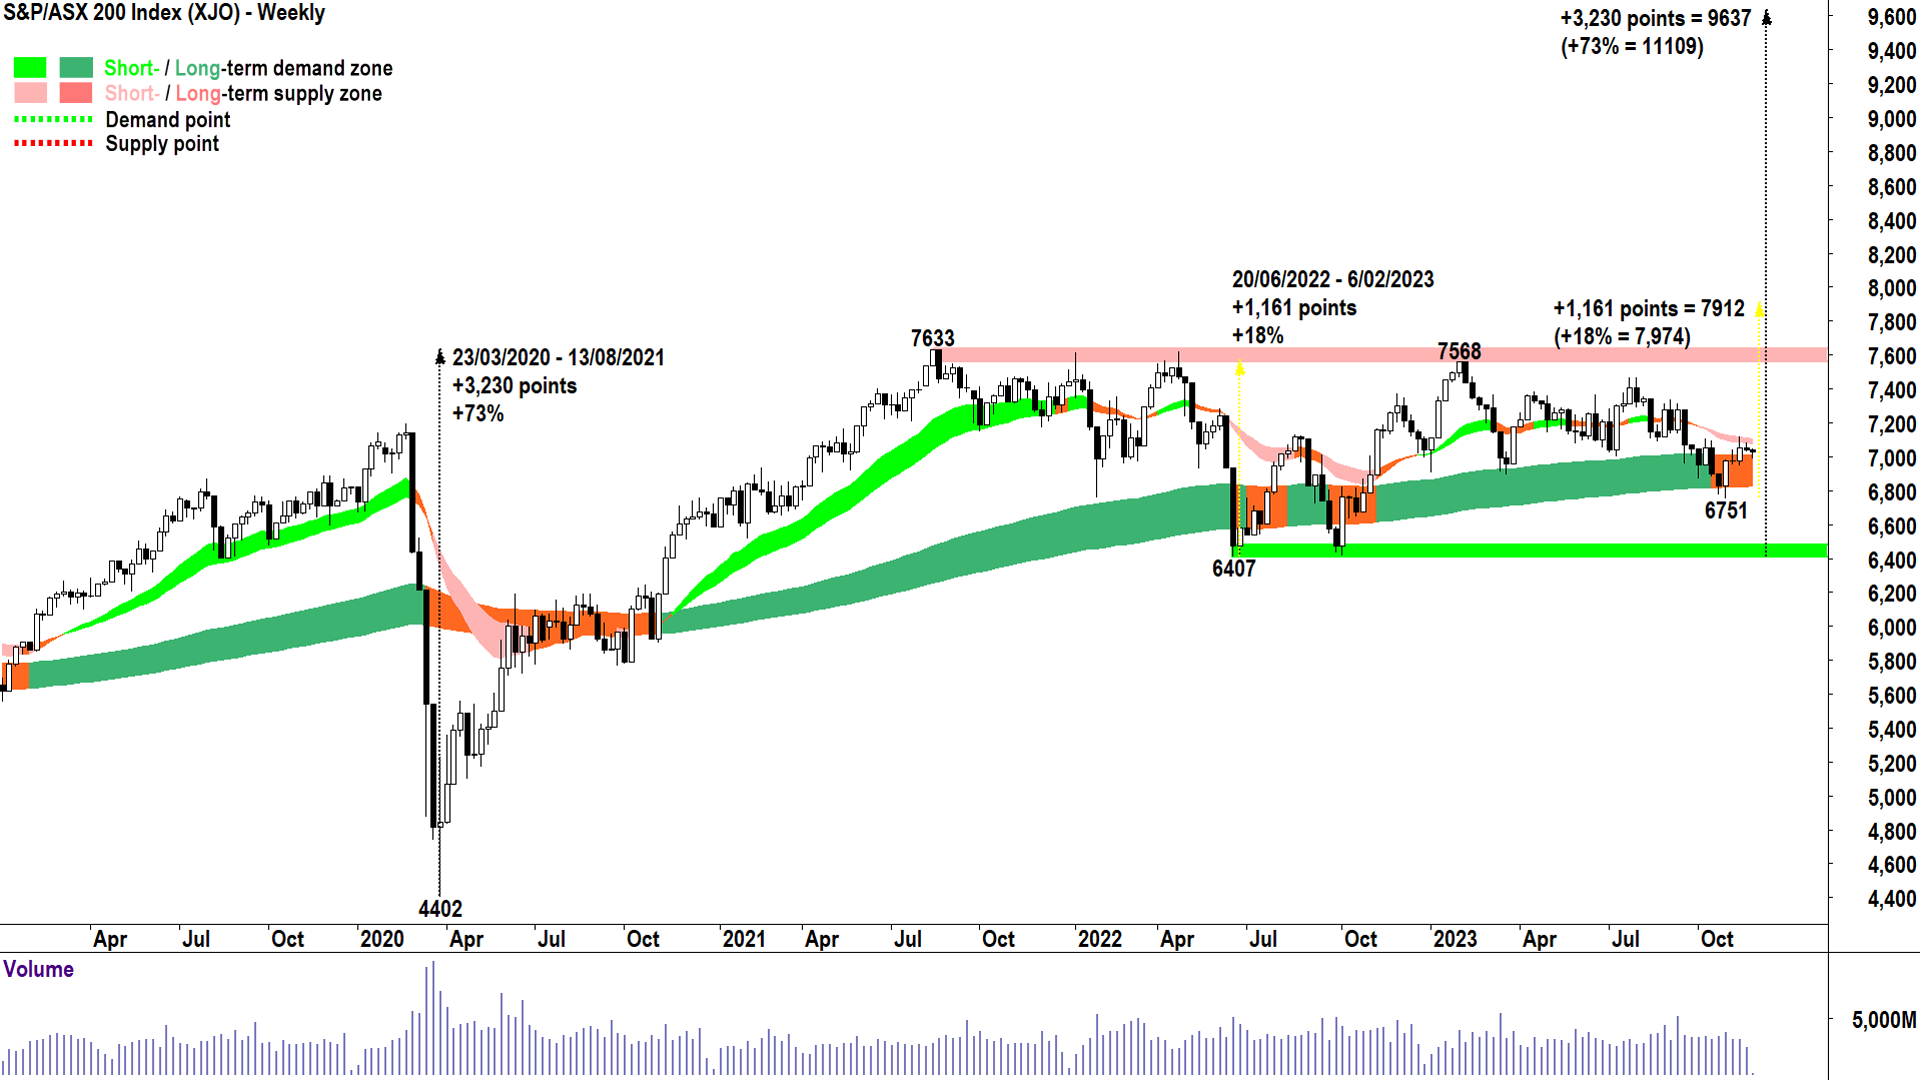 S&P ASX 200 measured move - 2024 target and beyond